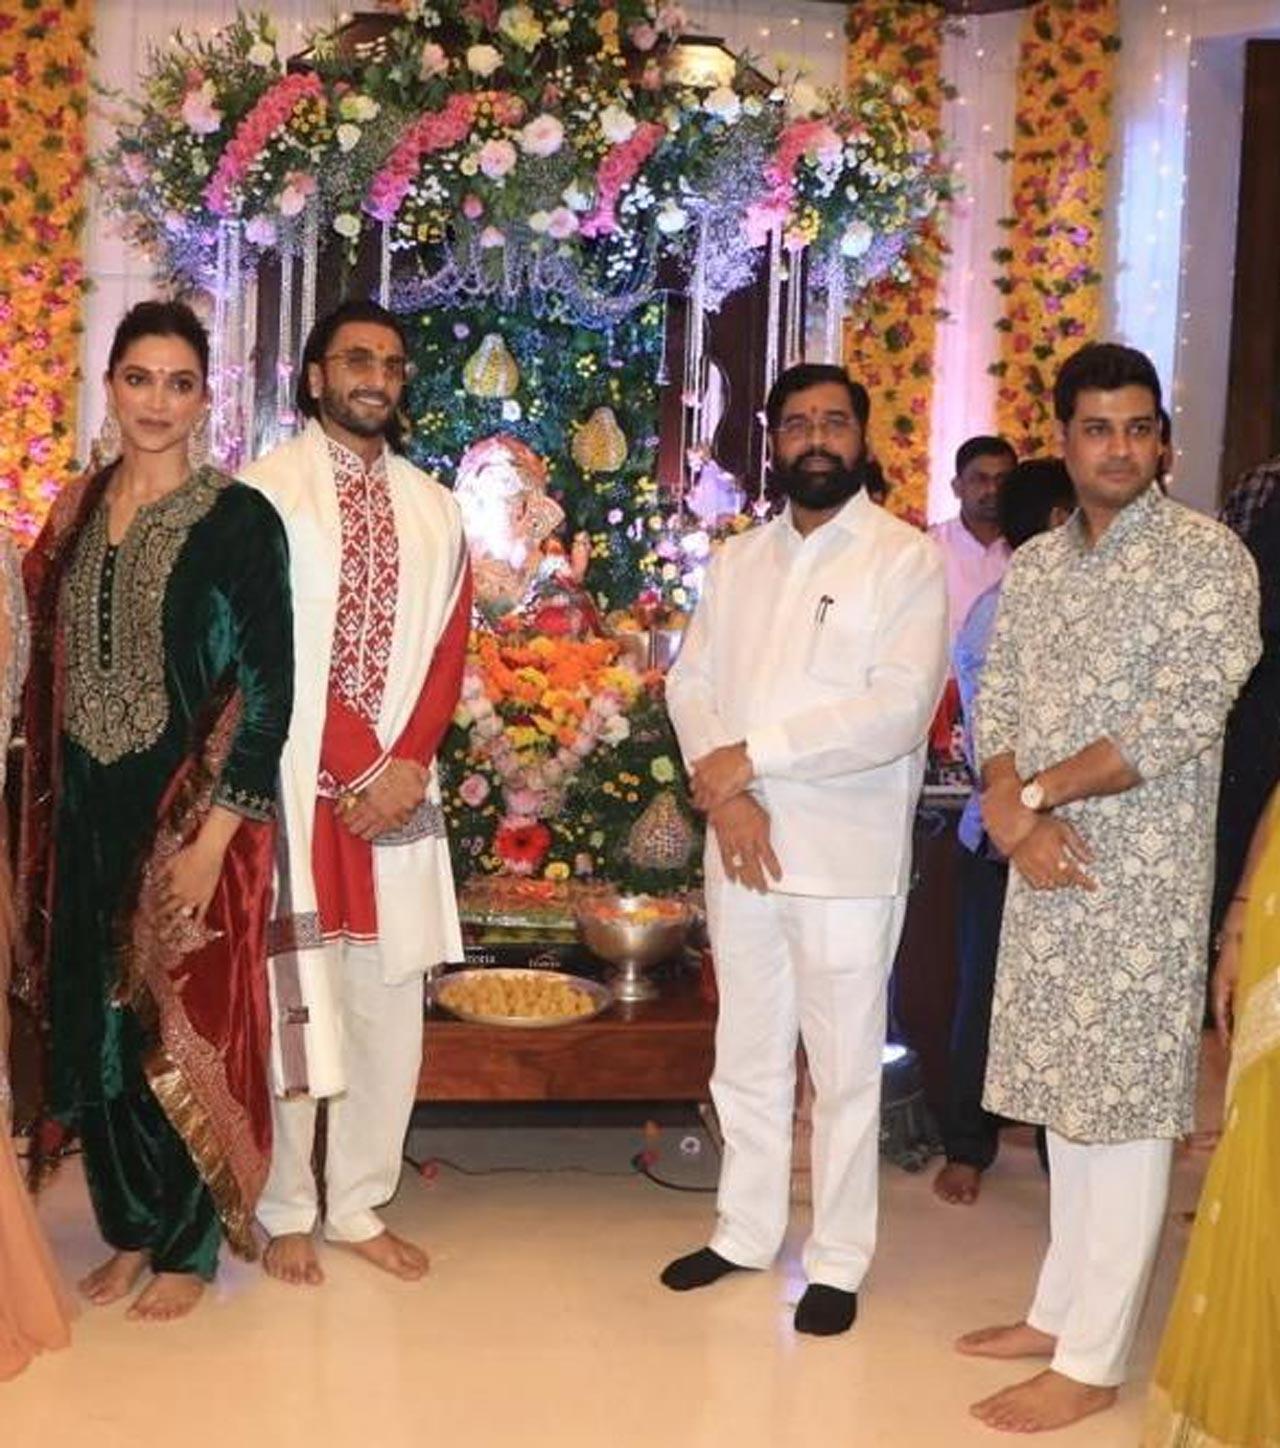 The entire eleven-day celebration of Lord Ganesha was the first grand public celebration at Varsha where the who's who of the city, heads of state departments, police top brass and the common citizens were hosted by CM Eknath Shinde after taking over the reins of the state